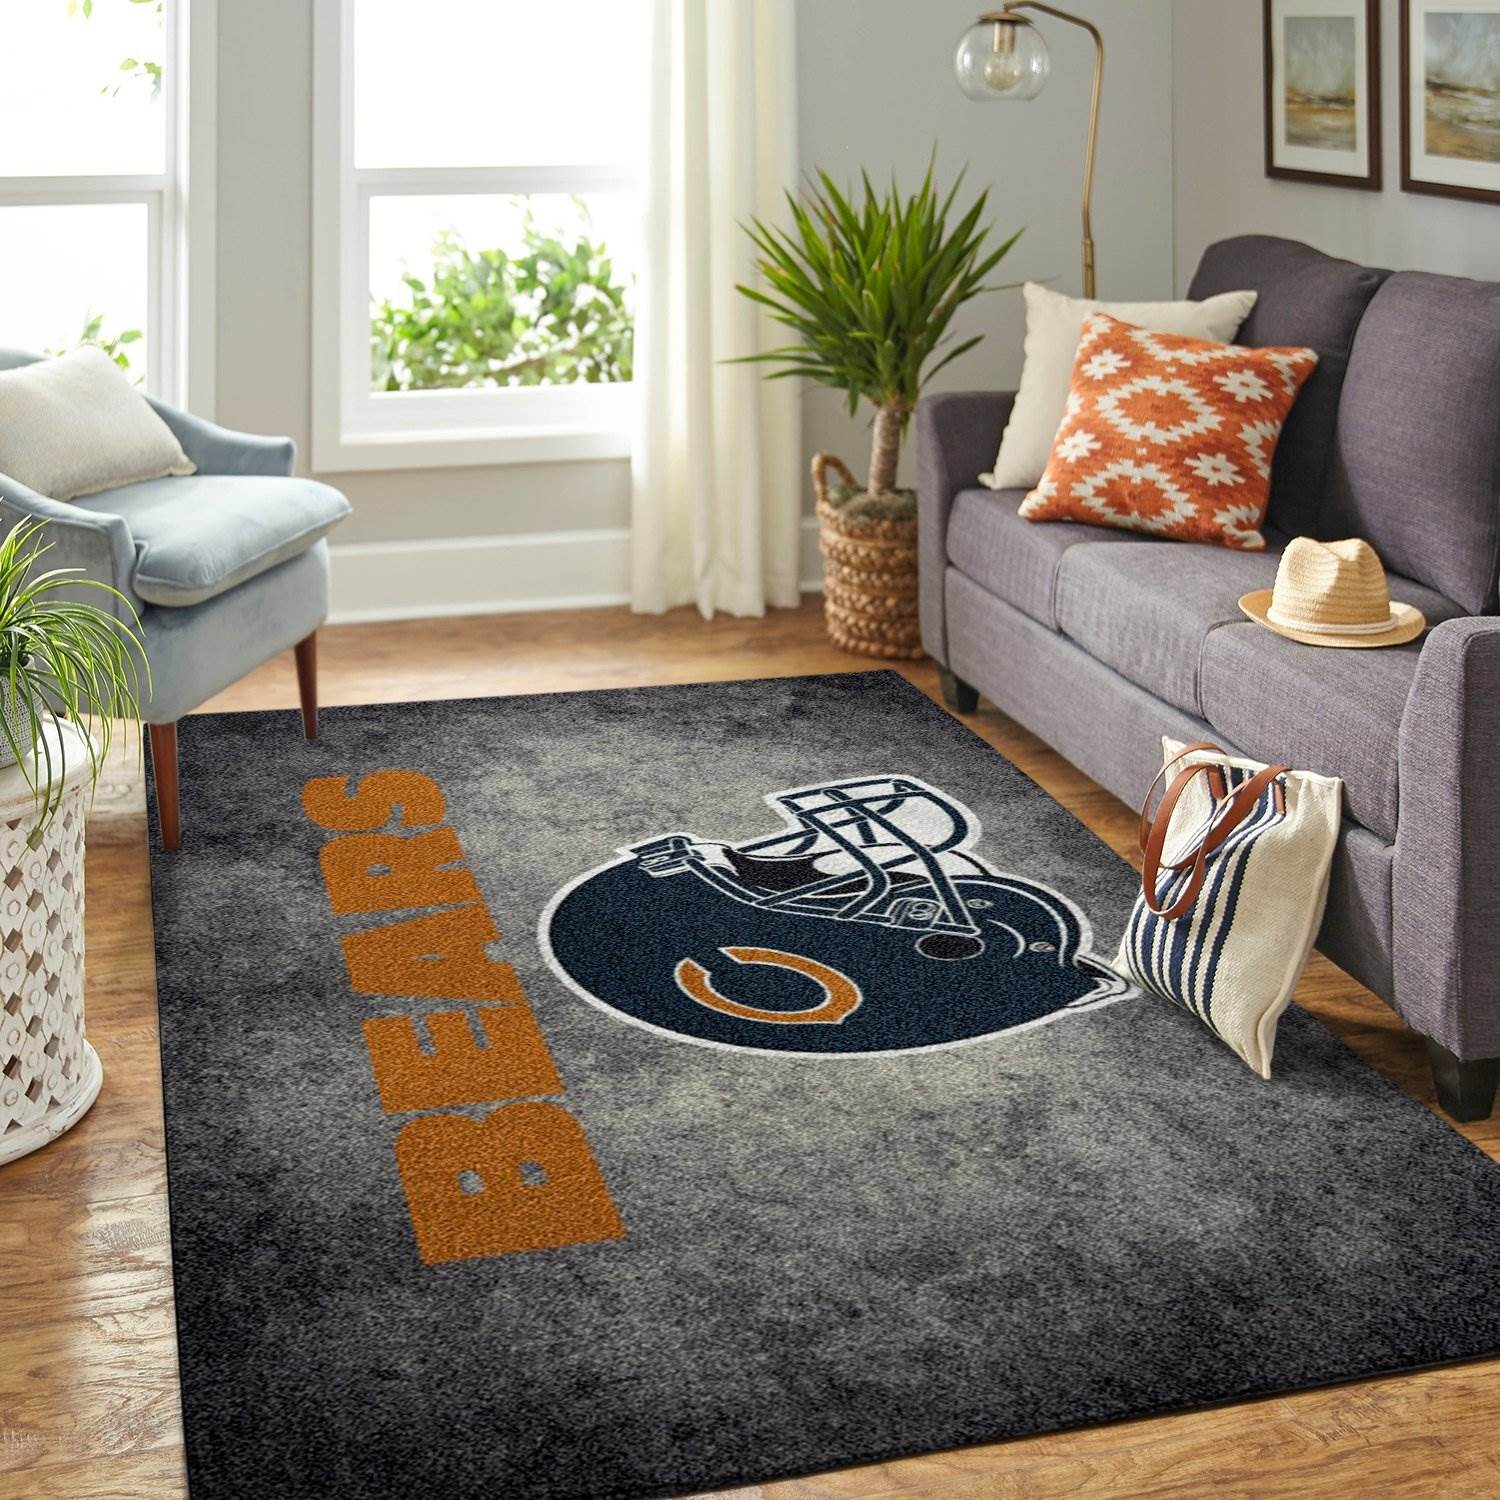 Chicago Bears Area Limited Edition Amazon Best Seller Sku 268053 Rug